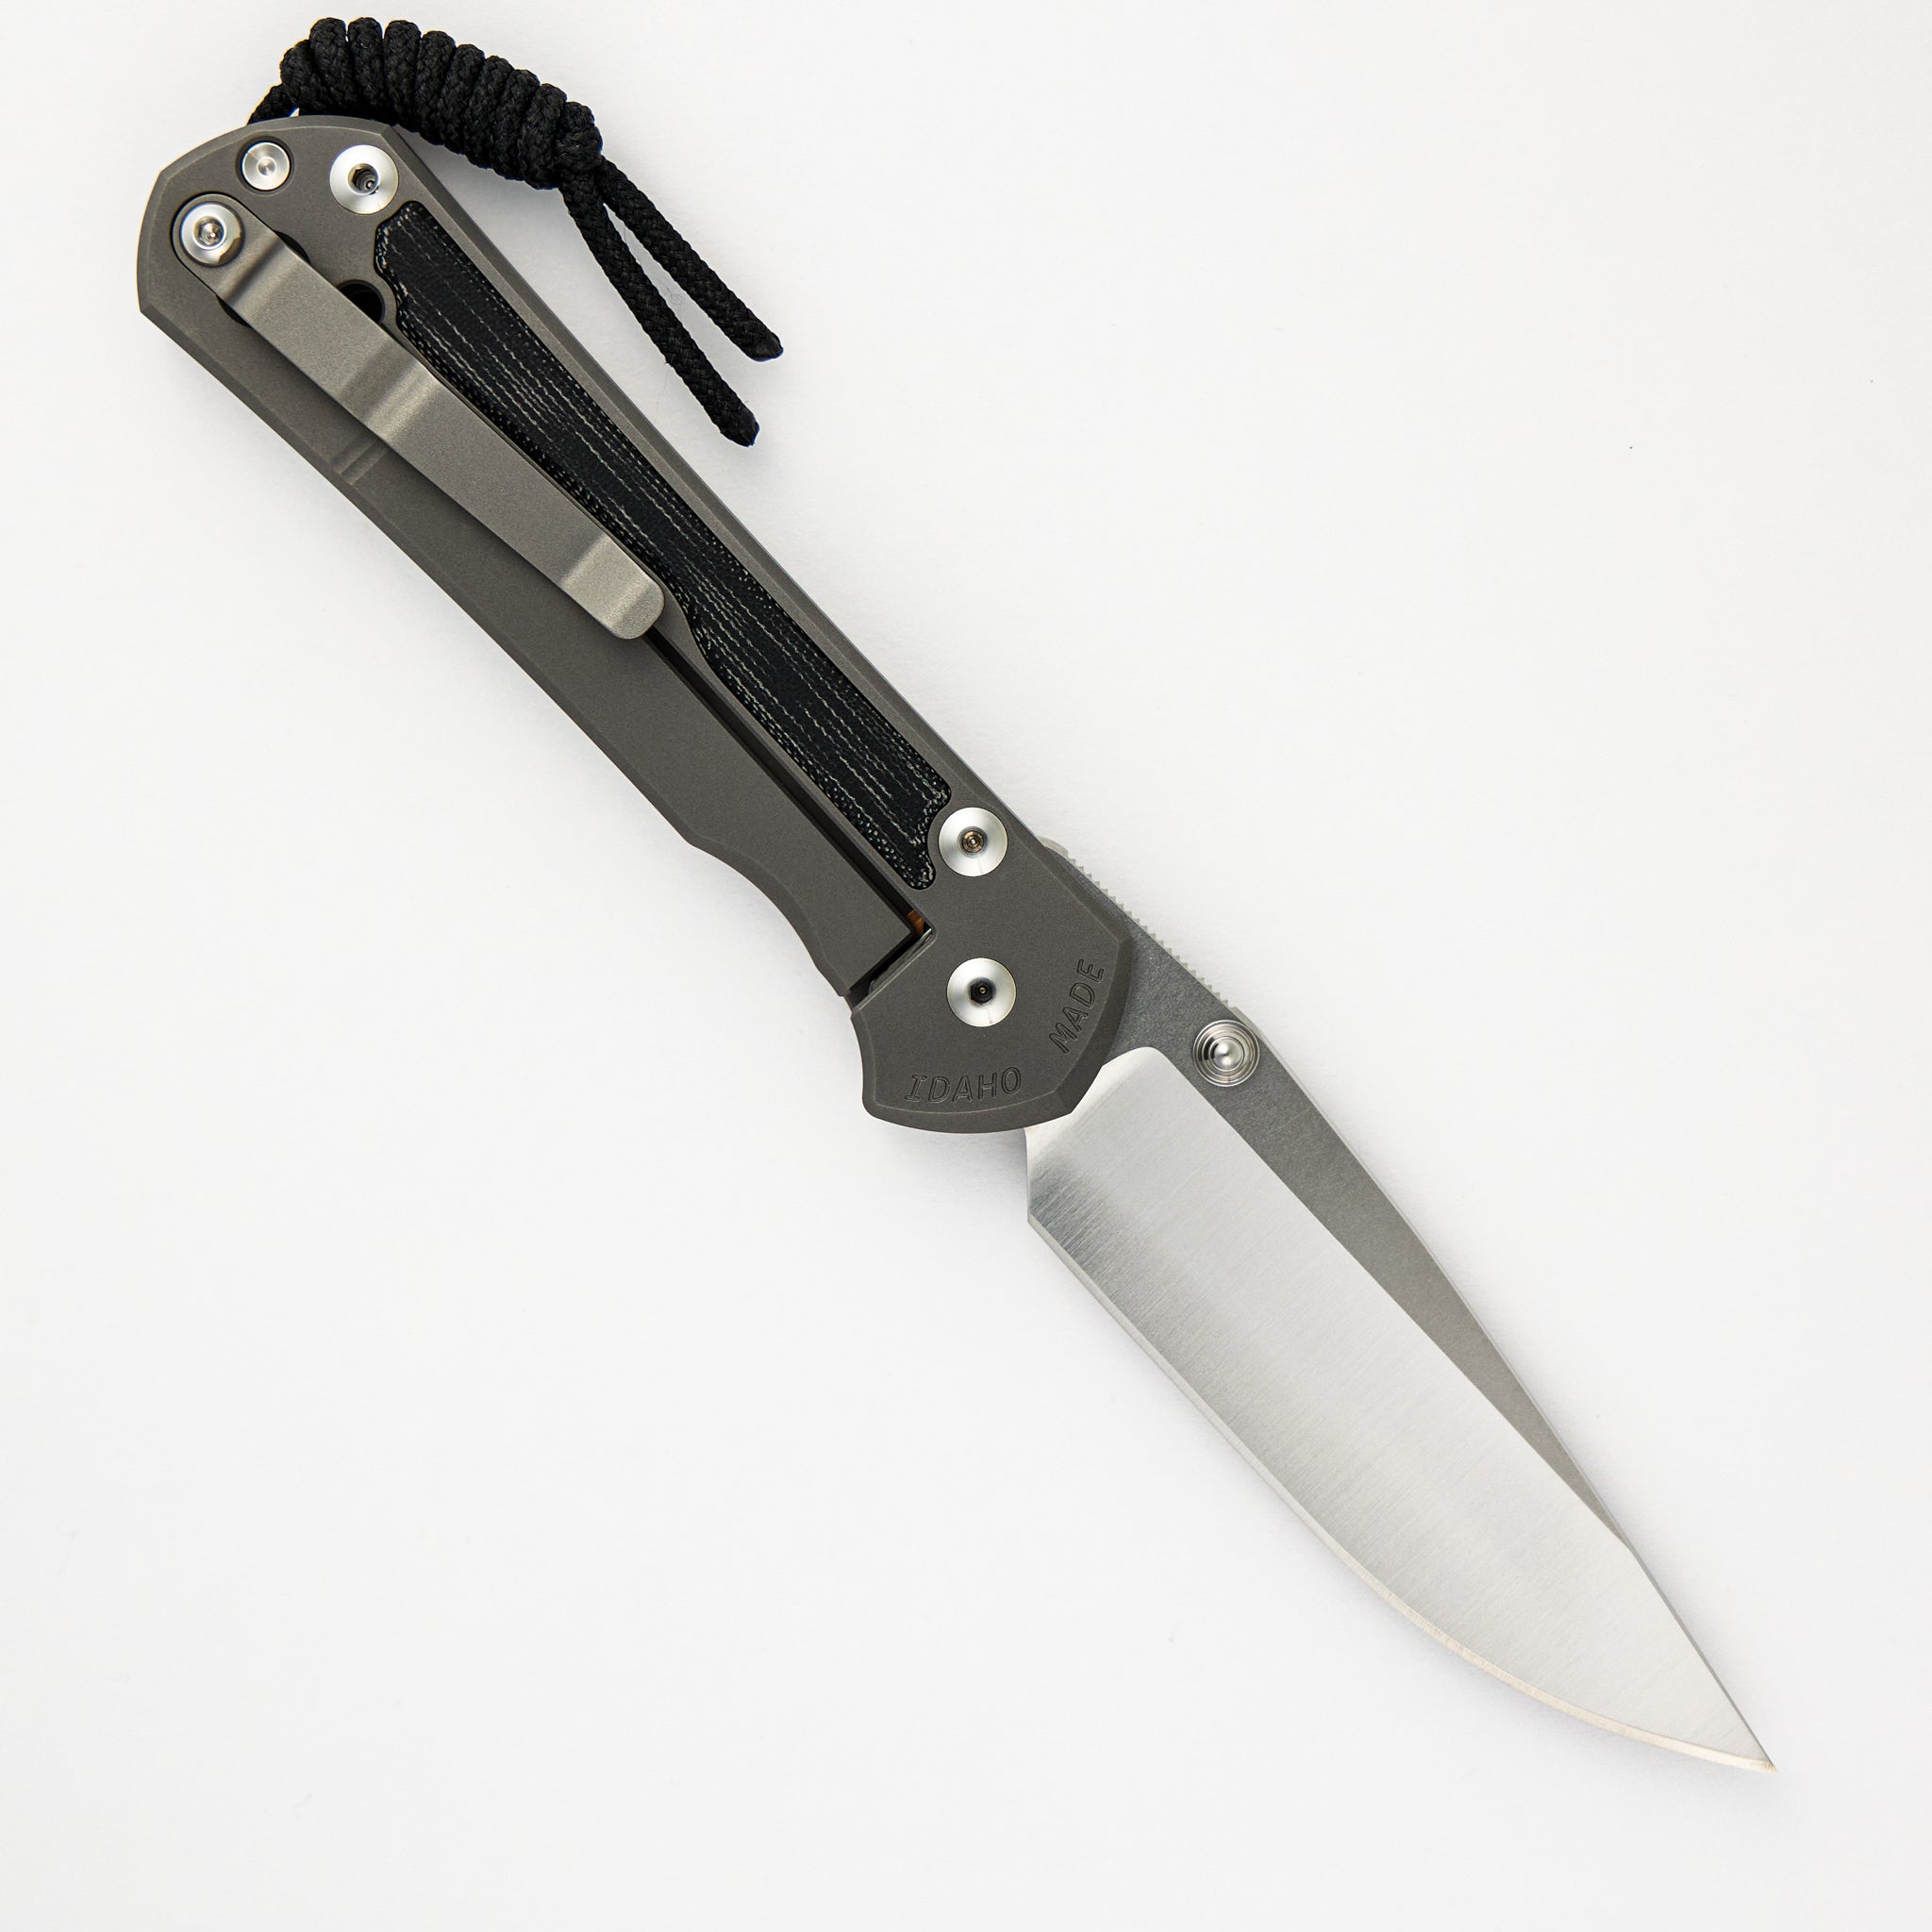 CHRIS REEVE LARGE SEBENZA 31 BLACK CANVAS MICARTA INLAY – POLISHED CPM MAGNACUT BLADE – GLASS BLASTED - SILVER DOUBLE THUMB LUGS